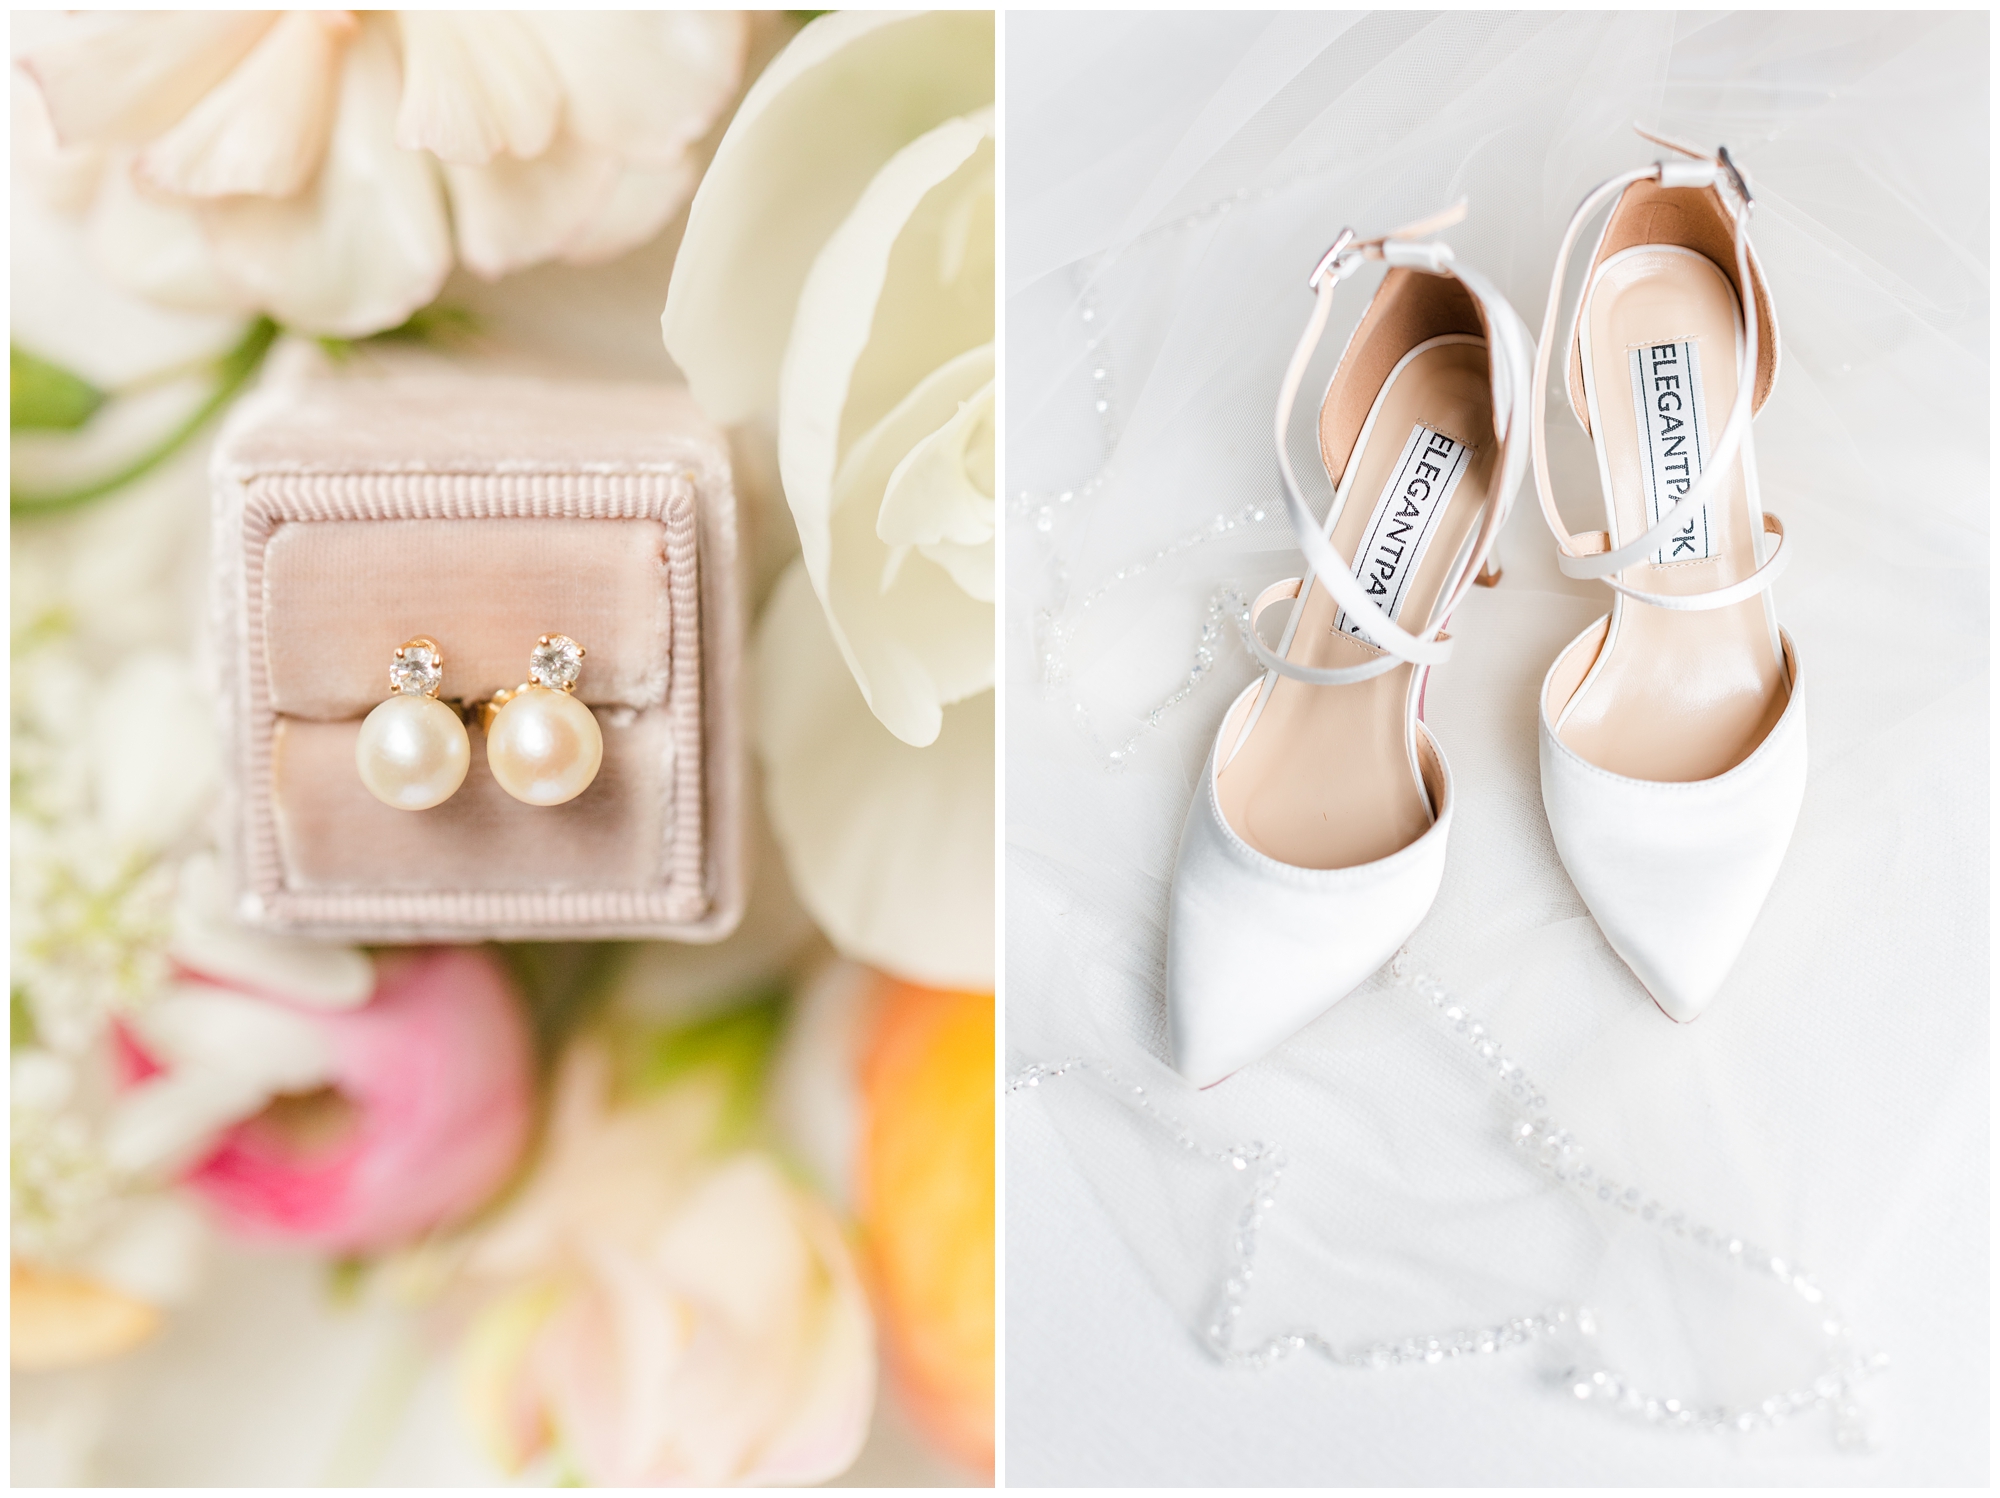 Pearl and diamond earrings are in a pink velvet box. The box sits atop the wedding bouquet. There is also a photo with white pointed toe wedding shoes on top of a wedding veil. 